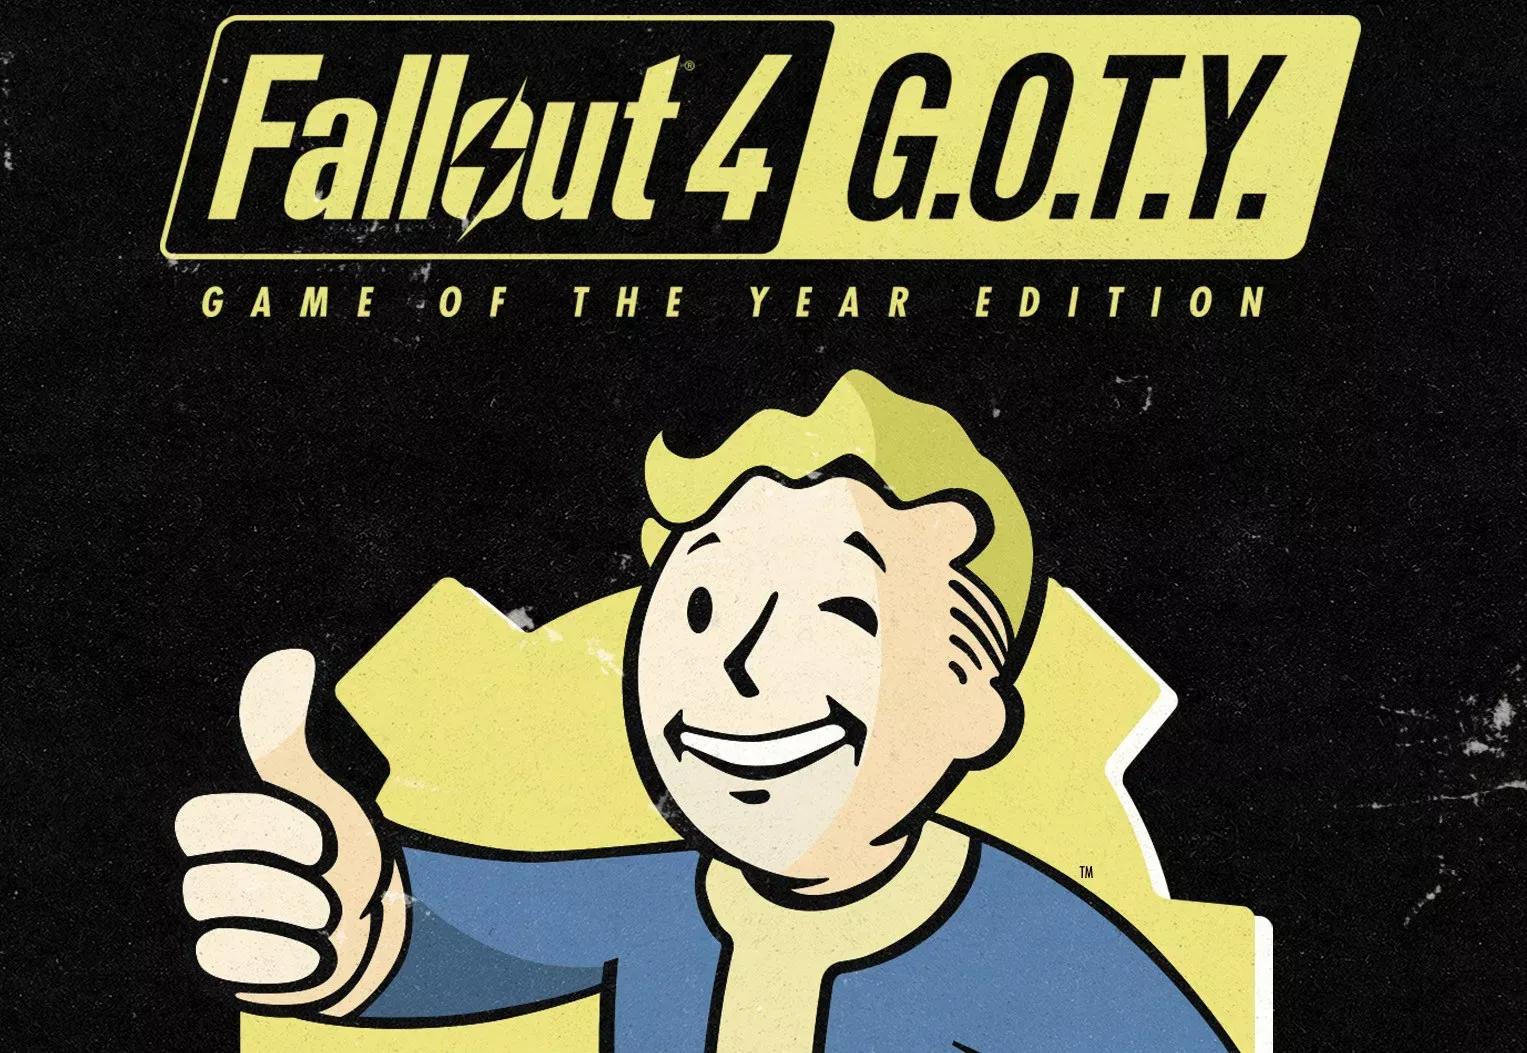 Fallout 4 Goty Edition (pc)